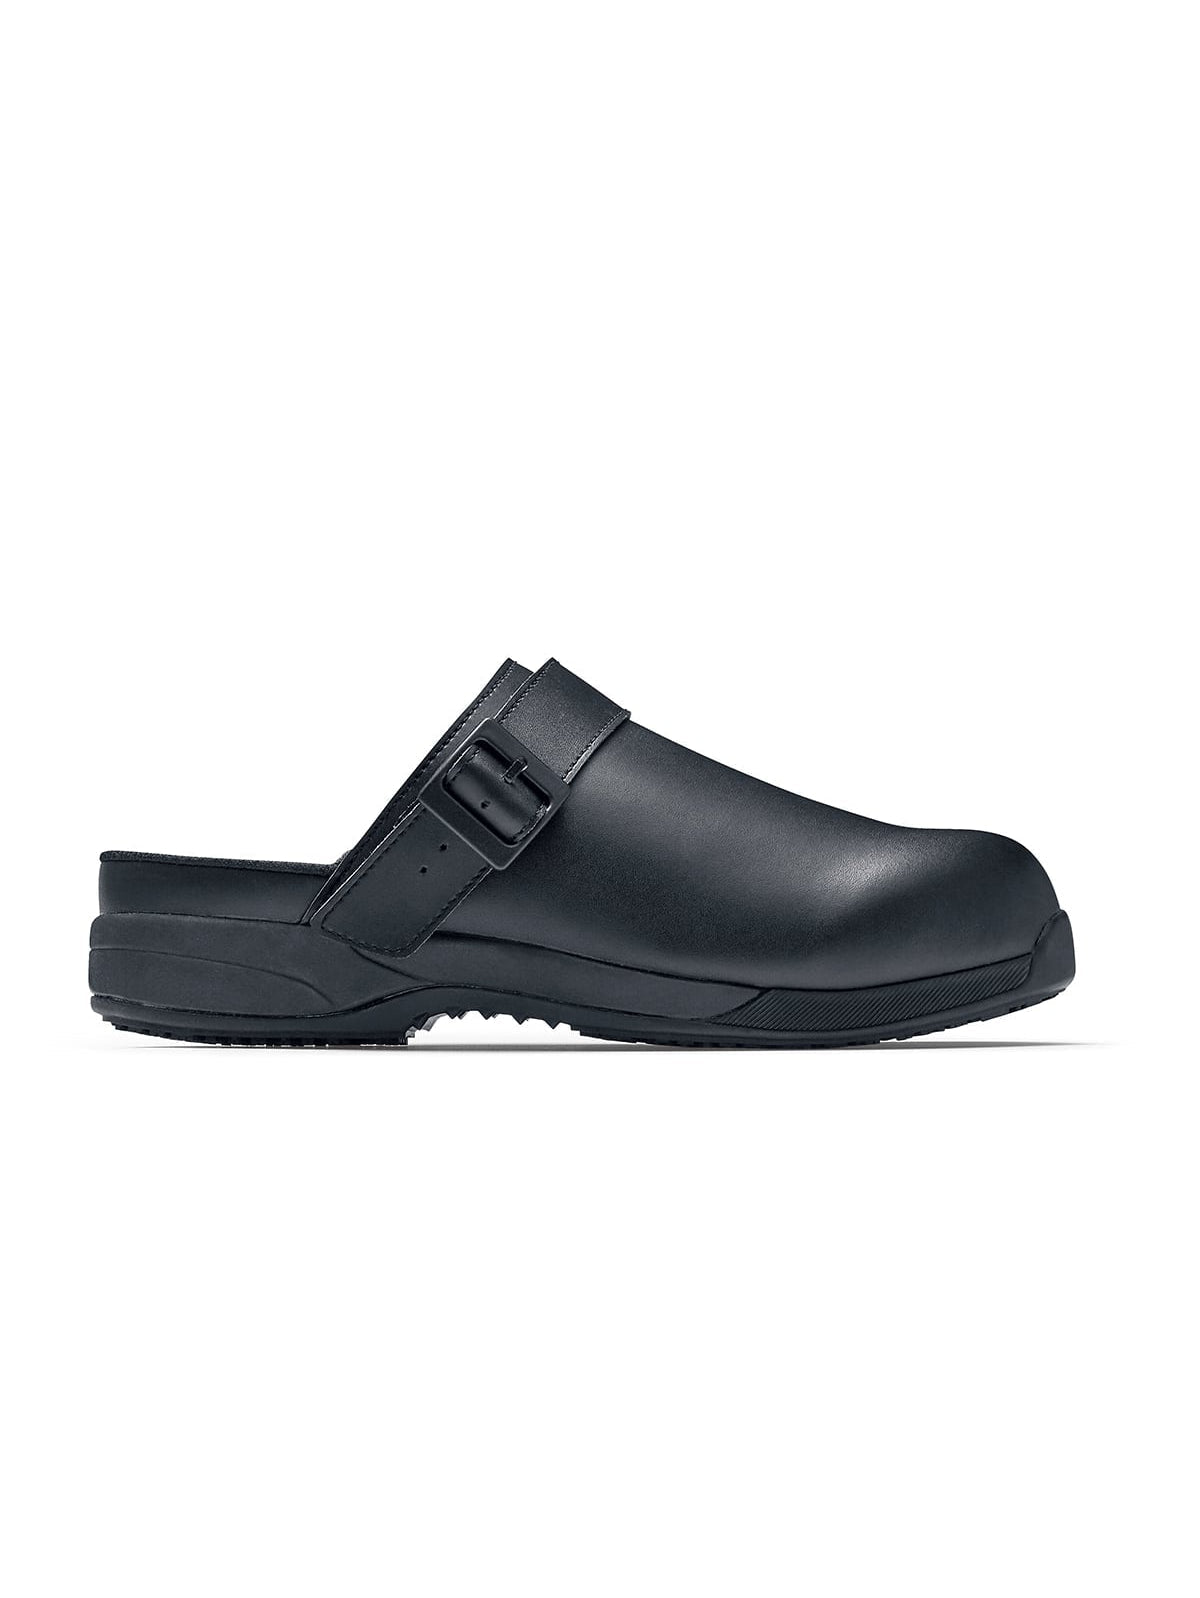 Unisex Work Shoe Triston II Black by Shoes For Crews -  ChefsCotton